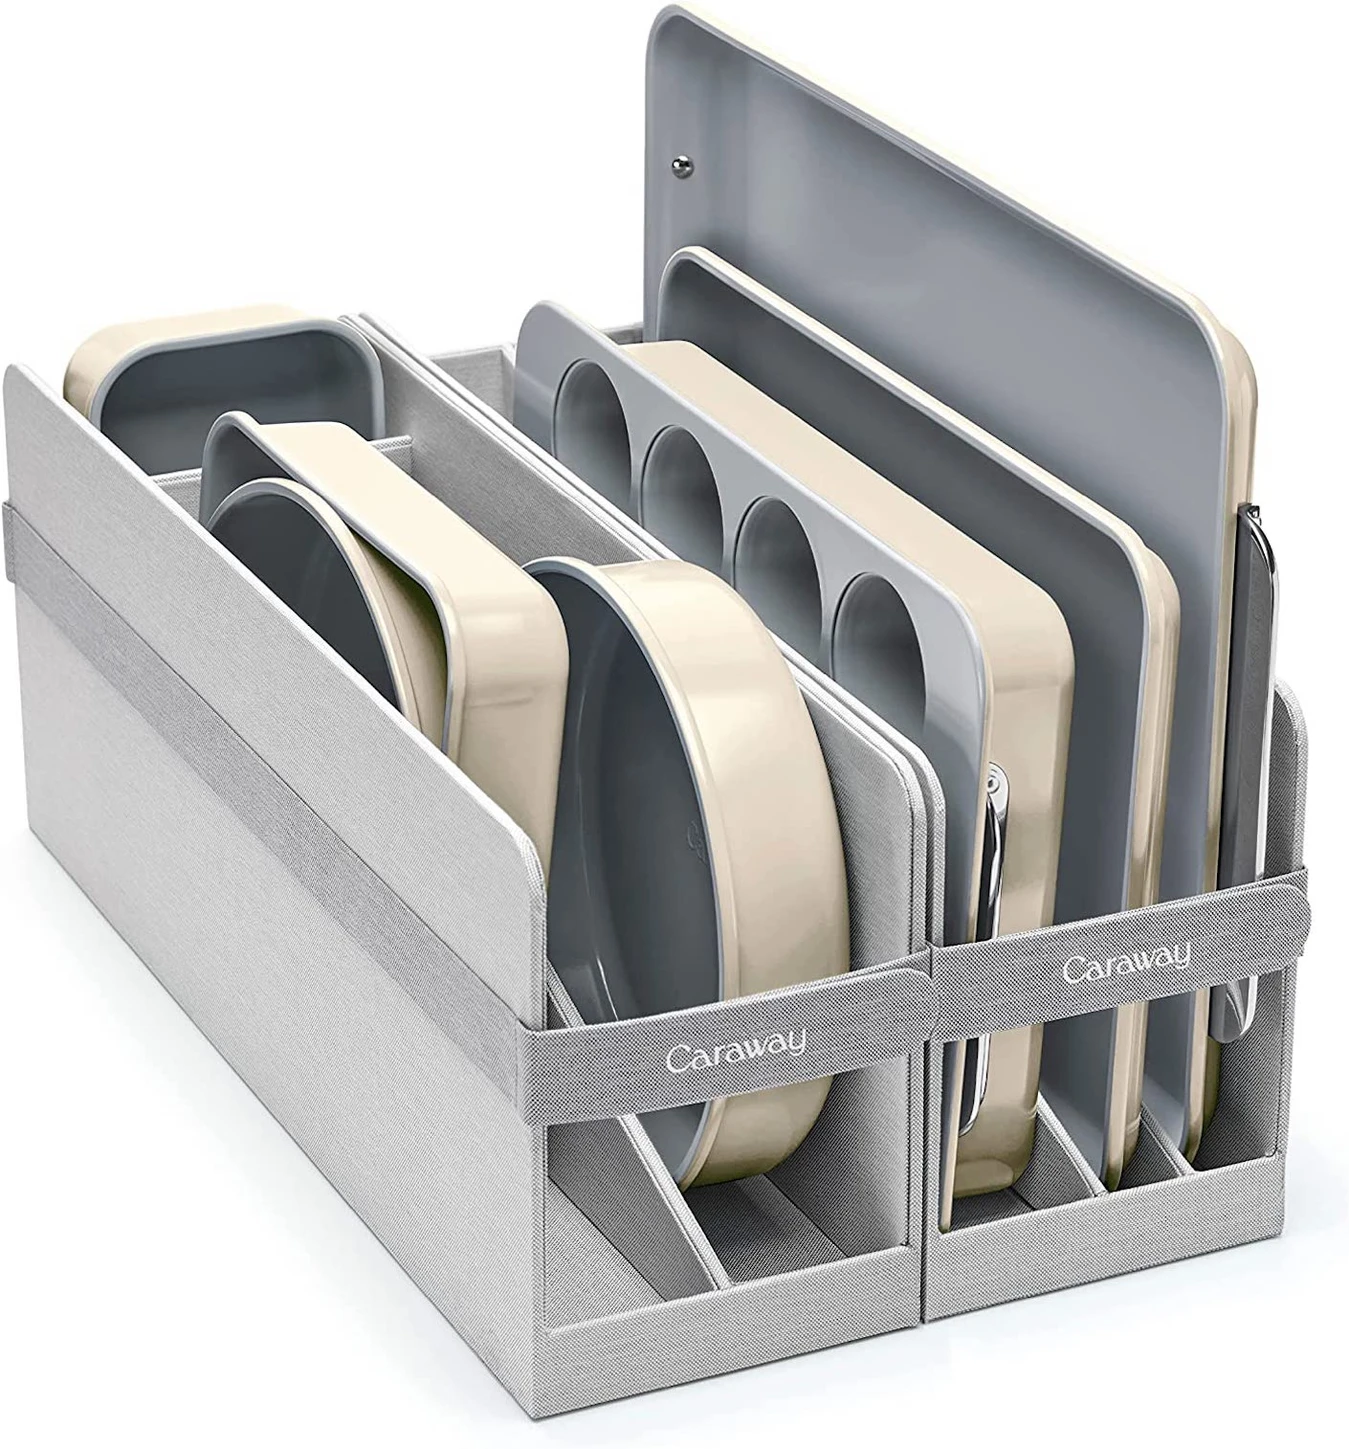 A set of metal bakeware is stacked on end in a metal rack.